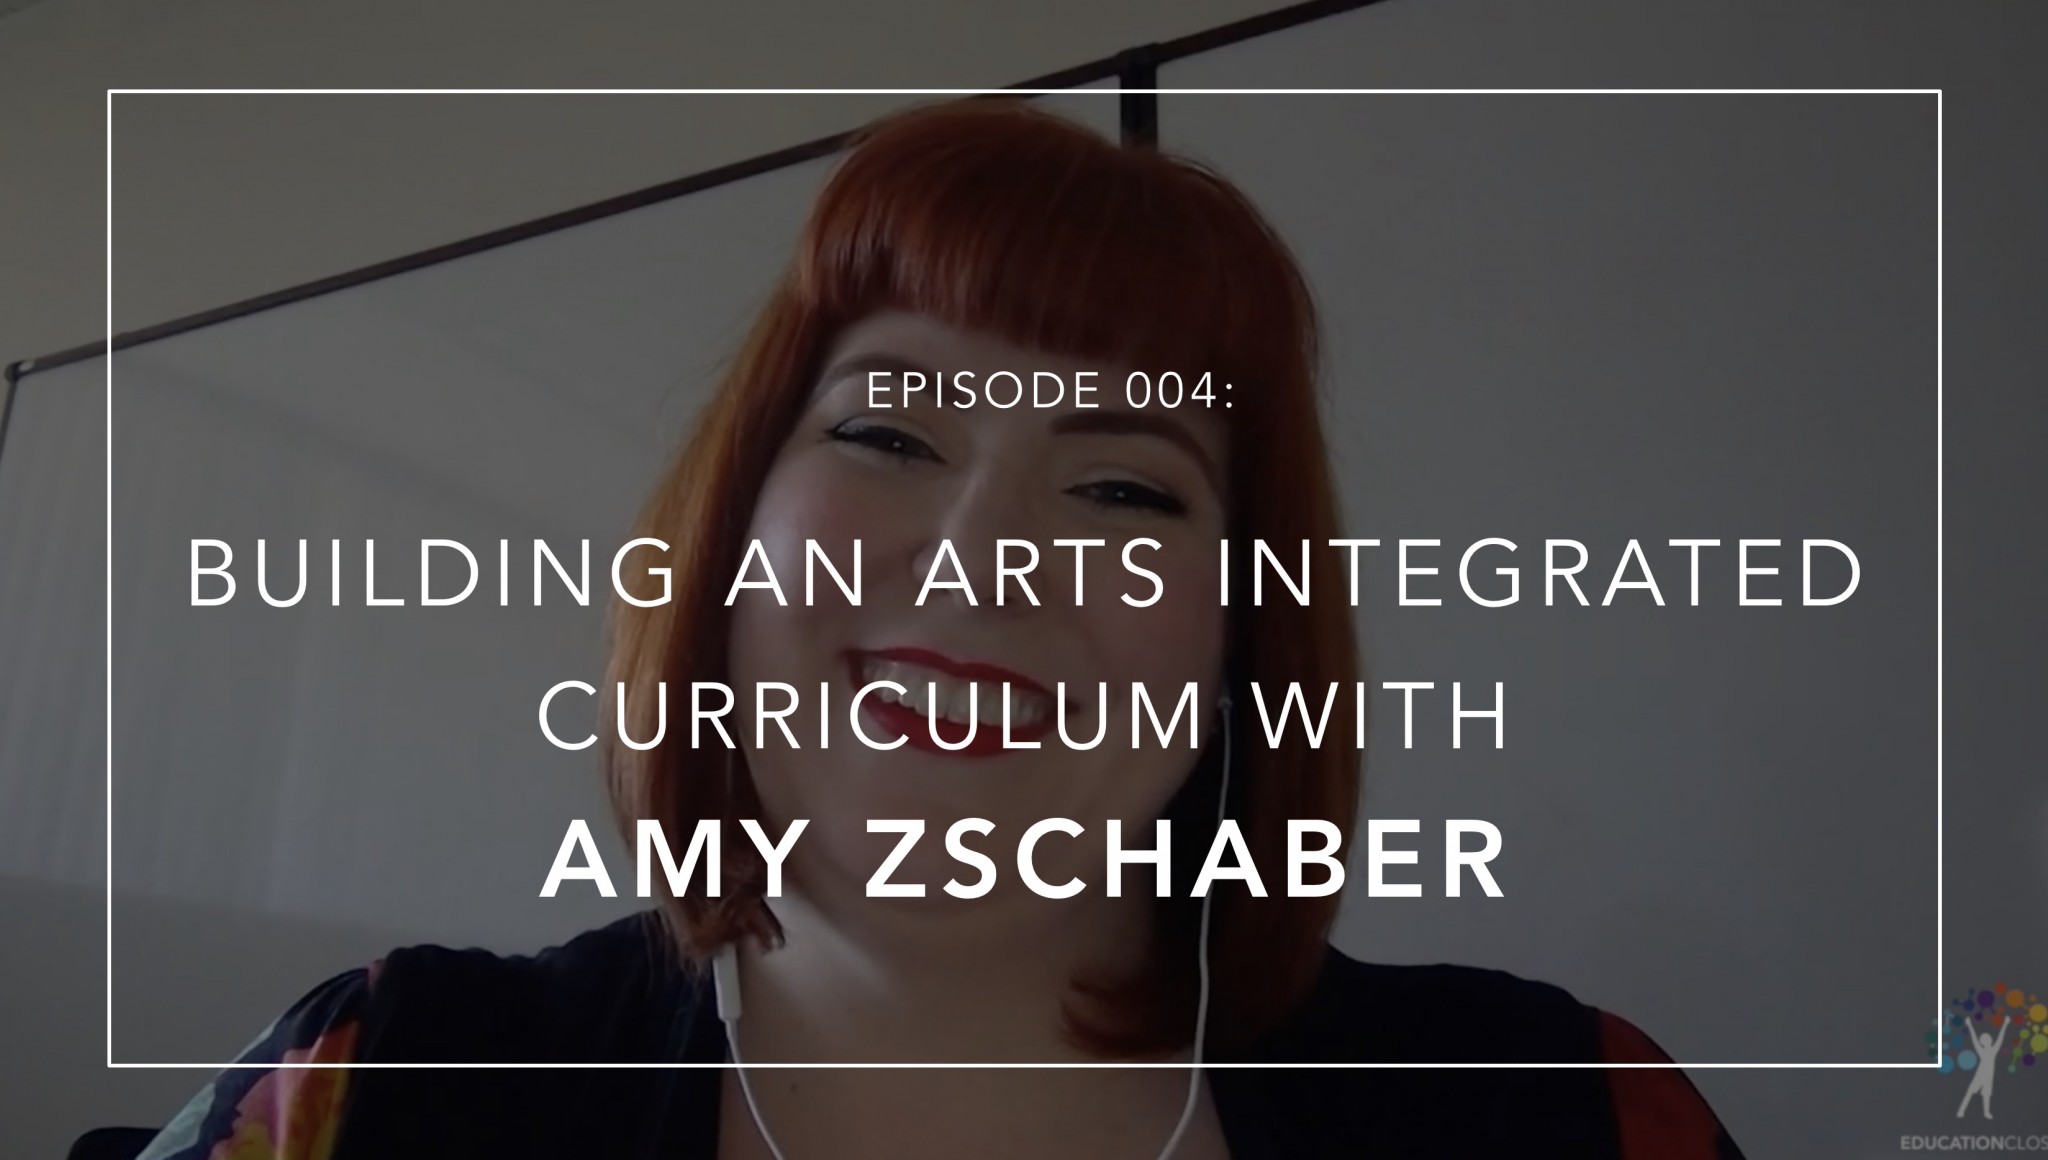 building an arts integrated curriculum with Amy Zschaber